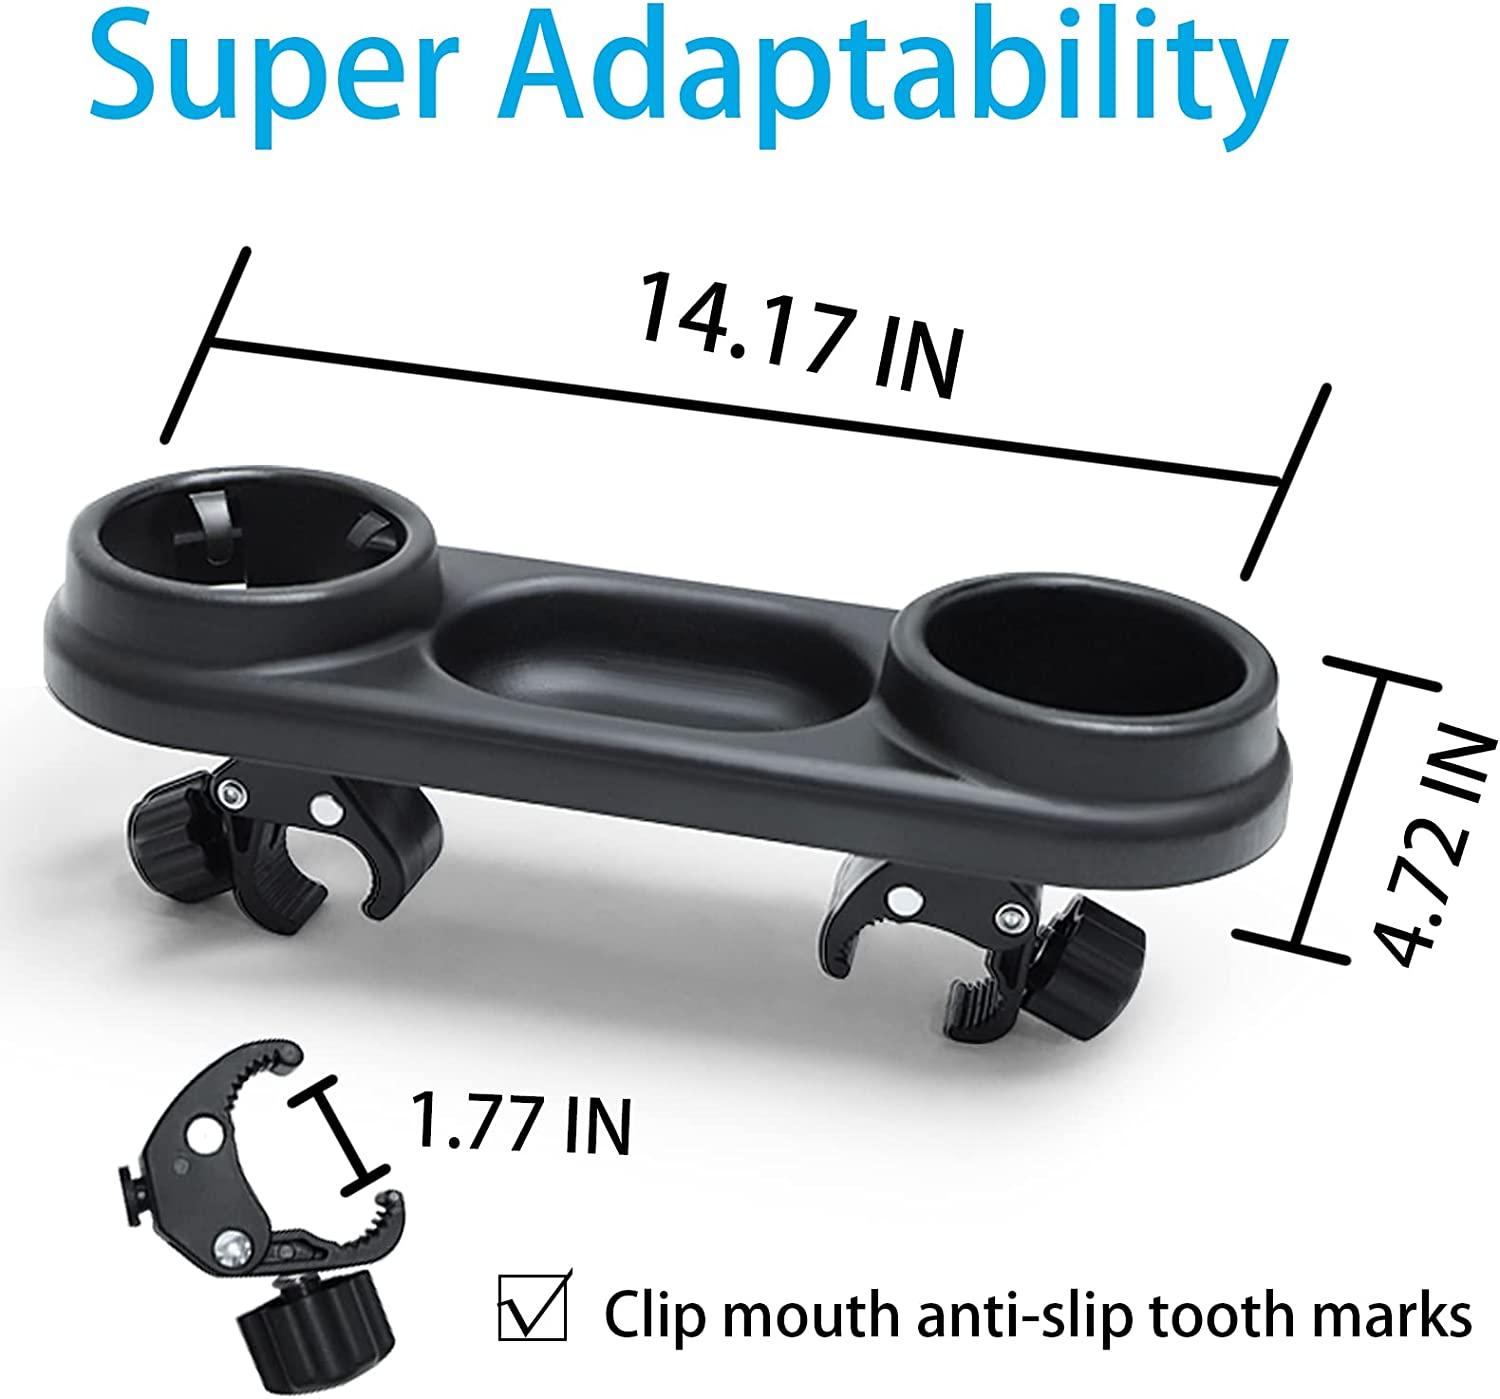 Piosoo Stroller Snack Tray with Cup Holder, Universal Stroller Snack Attachment, Upgraded Removable Non-Slip Grip Clip for Stroller Bar, Large Capacity